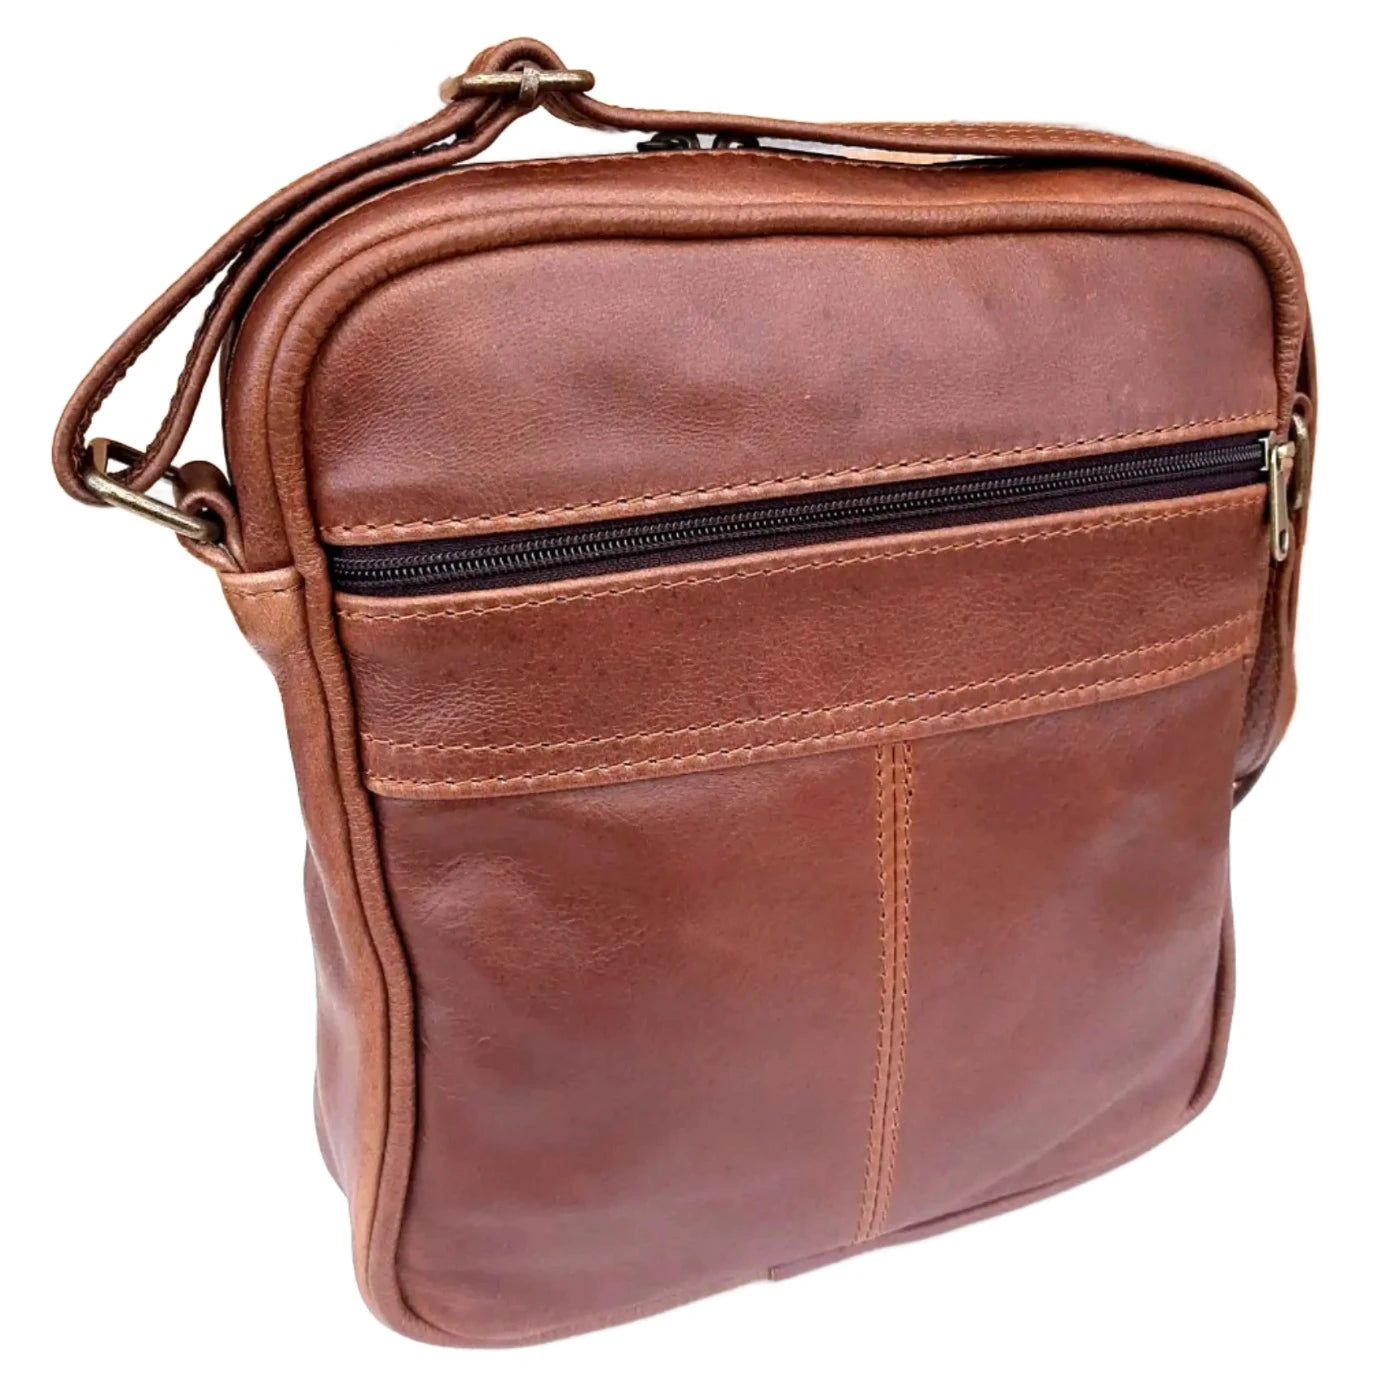 Men's Messenger bag in pecan tan colour made by  cape Masai Leather